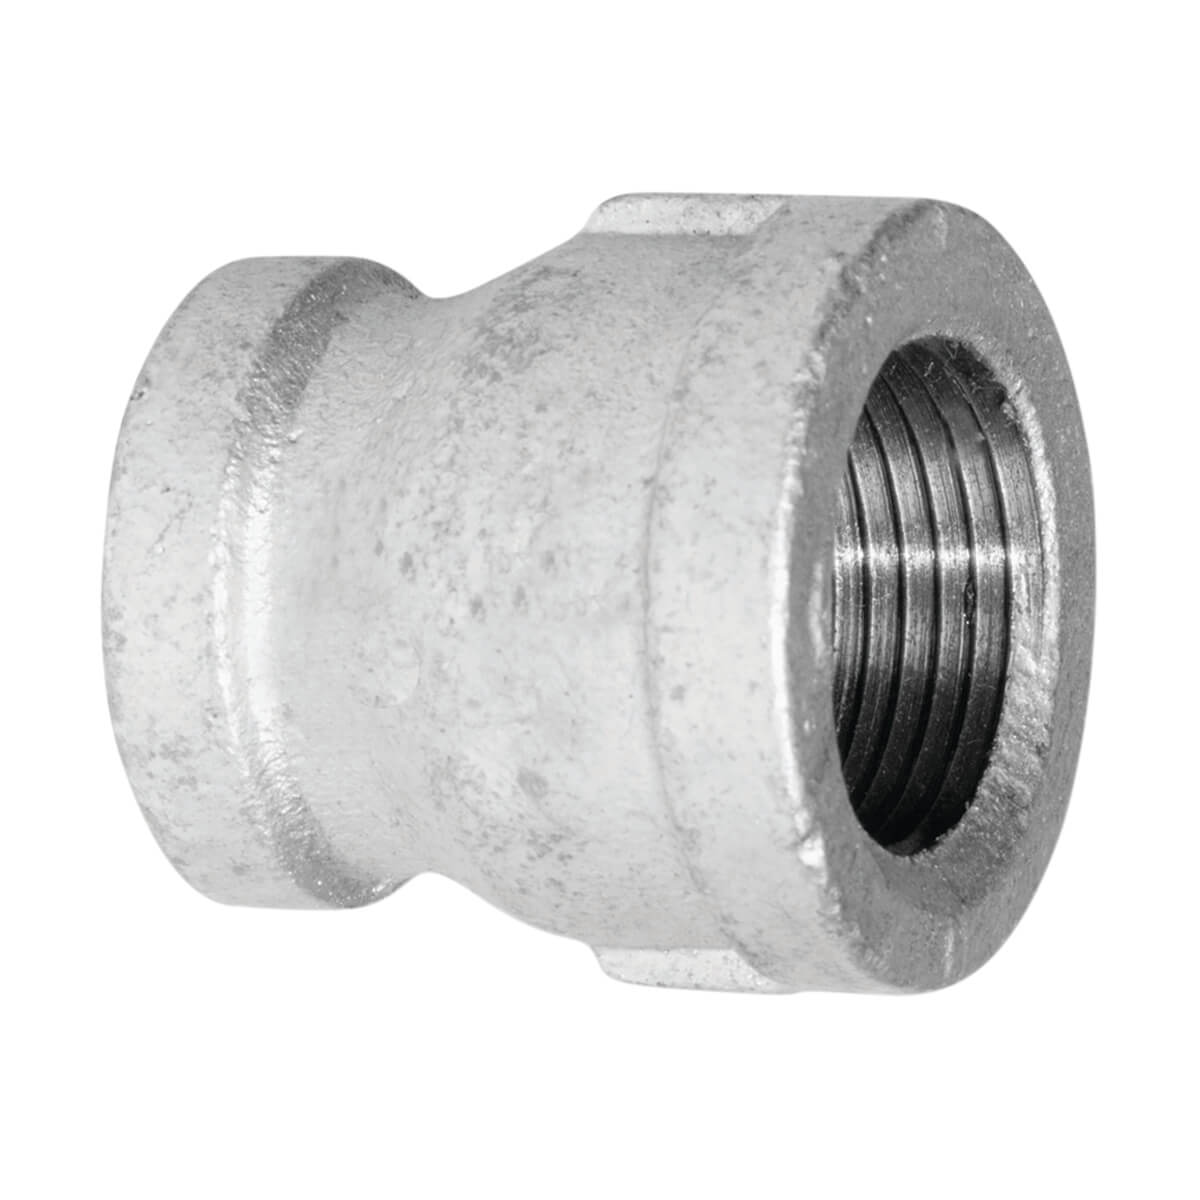 Fitting Galvanized Iron Coupling - 1-in x 3/4-in